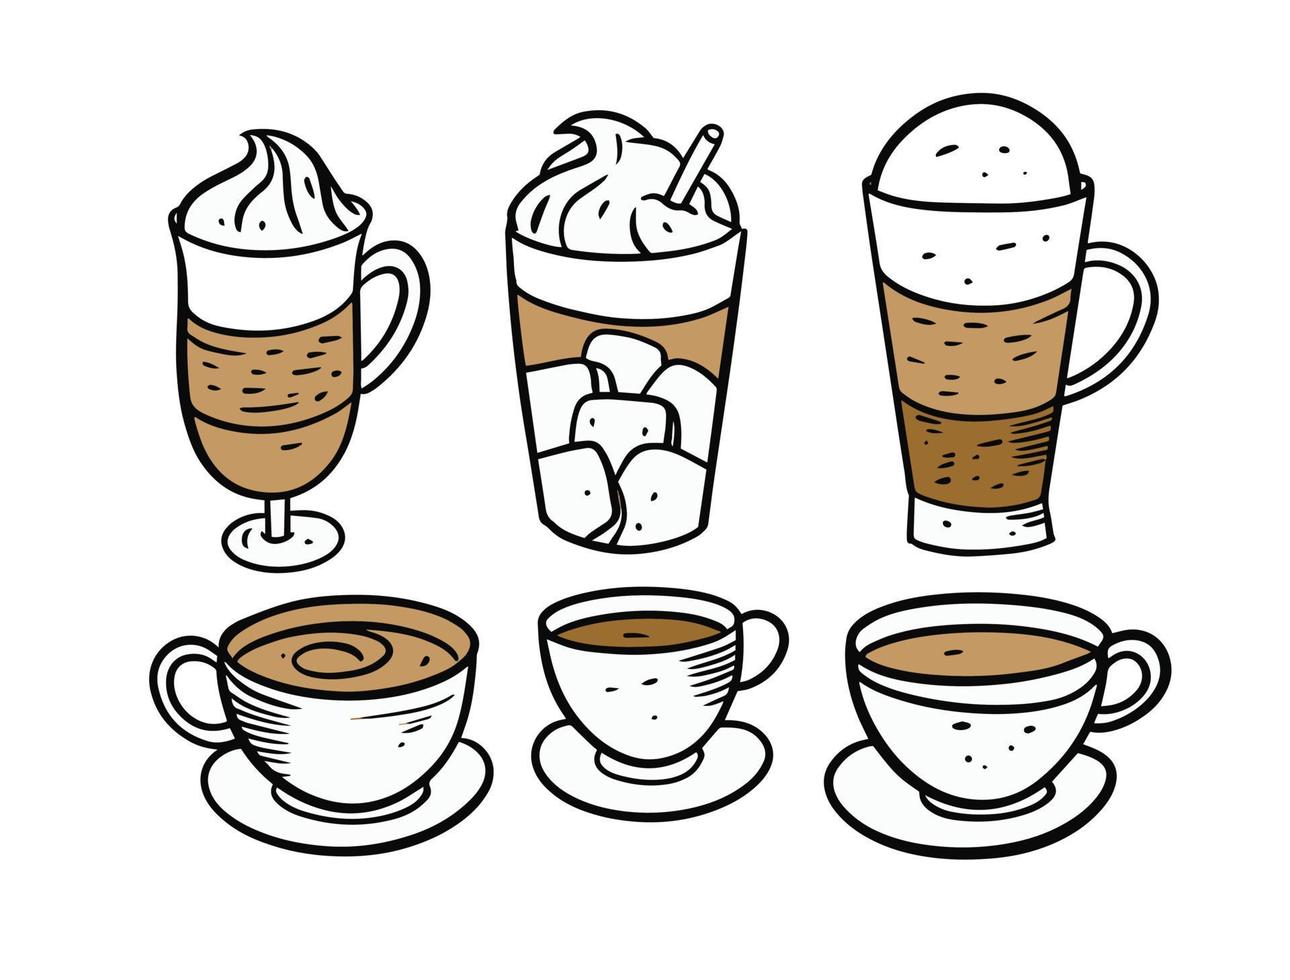 Coffee cups and mugs set. Colorful vector illustration.